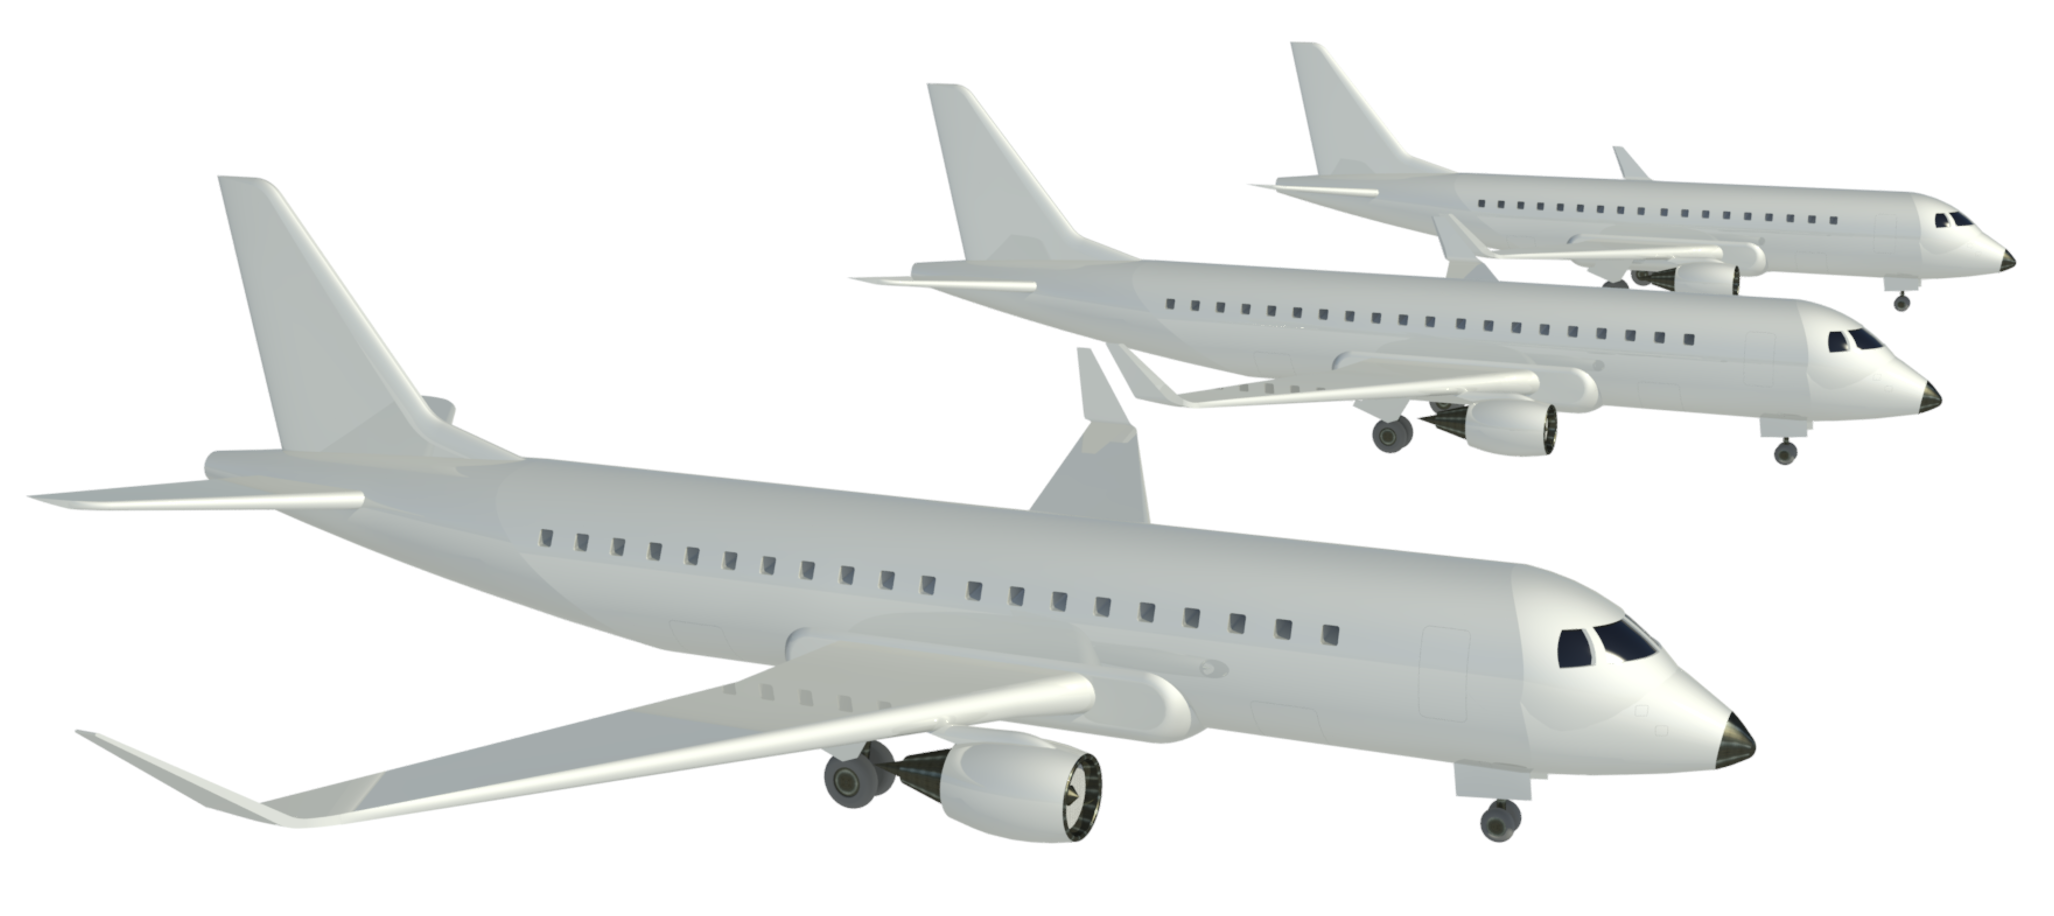 Revit Ray-trace showing Embraer aircraft.